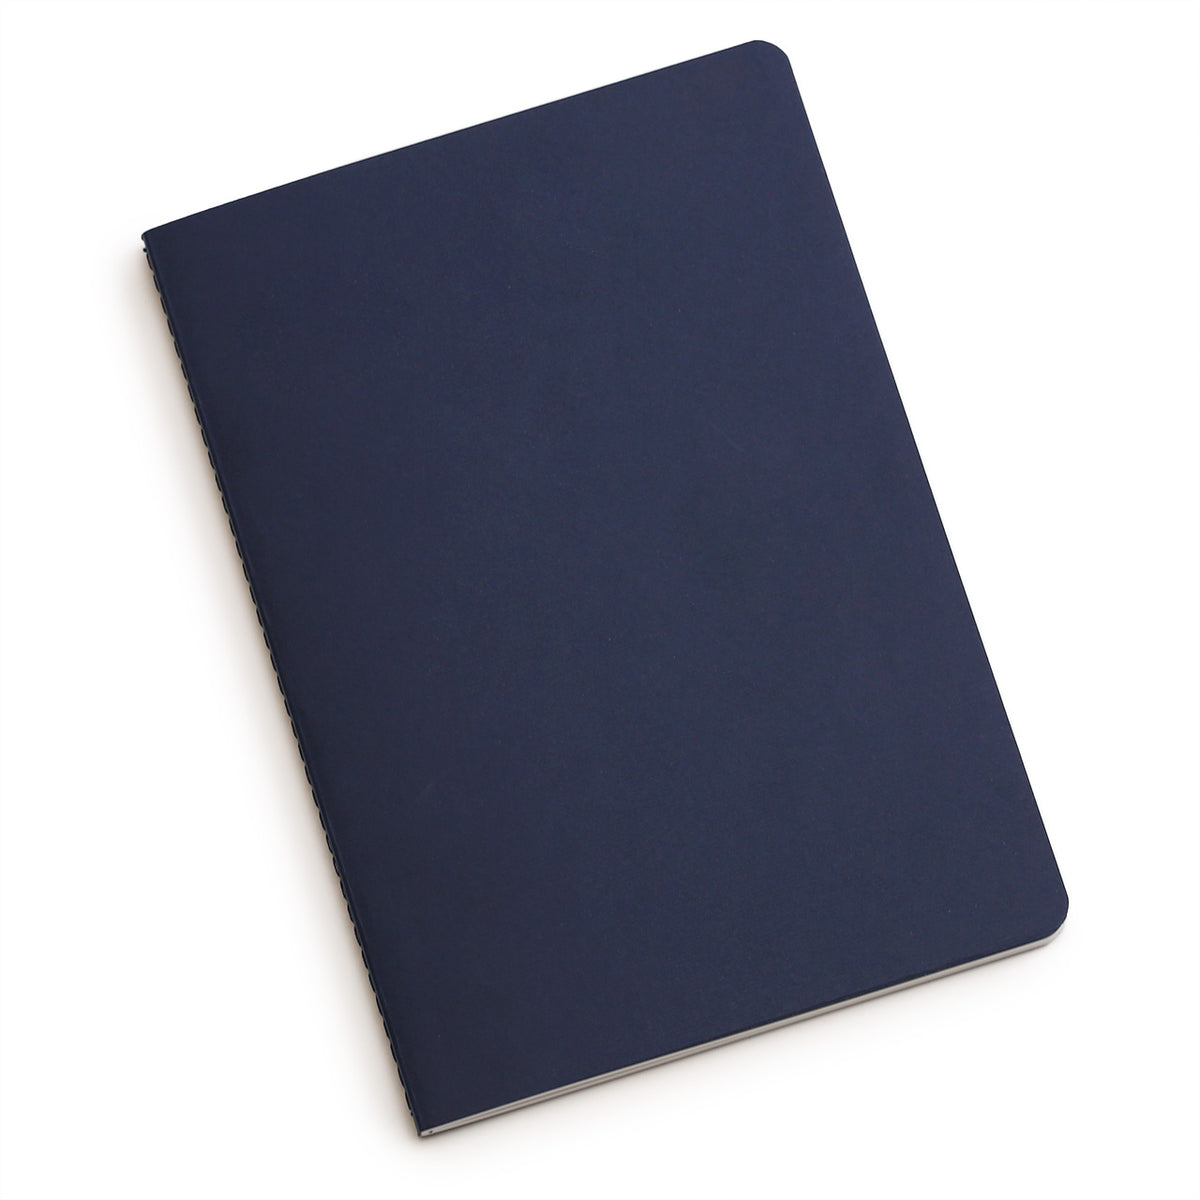 MyPAPERCLIP A5 navy blue refill book with lined pages and stitched spine